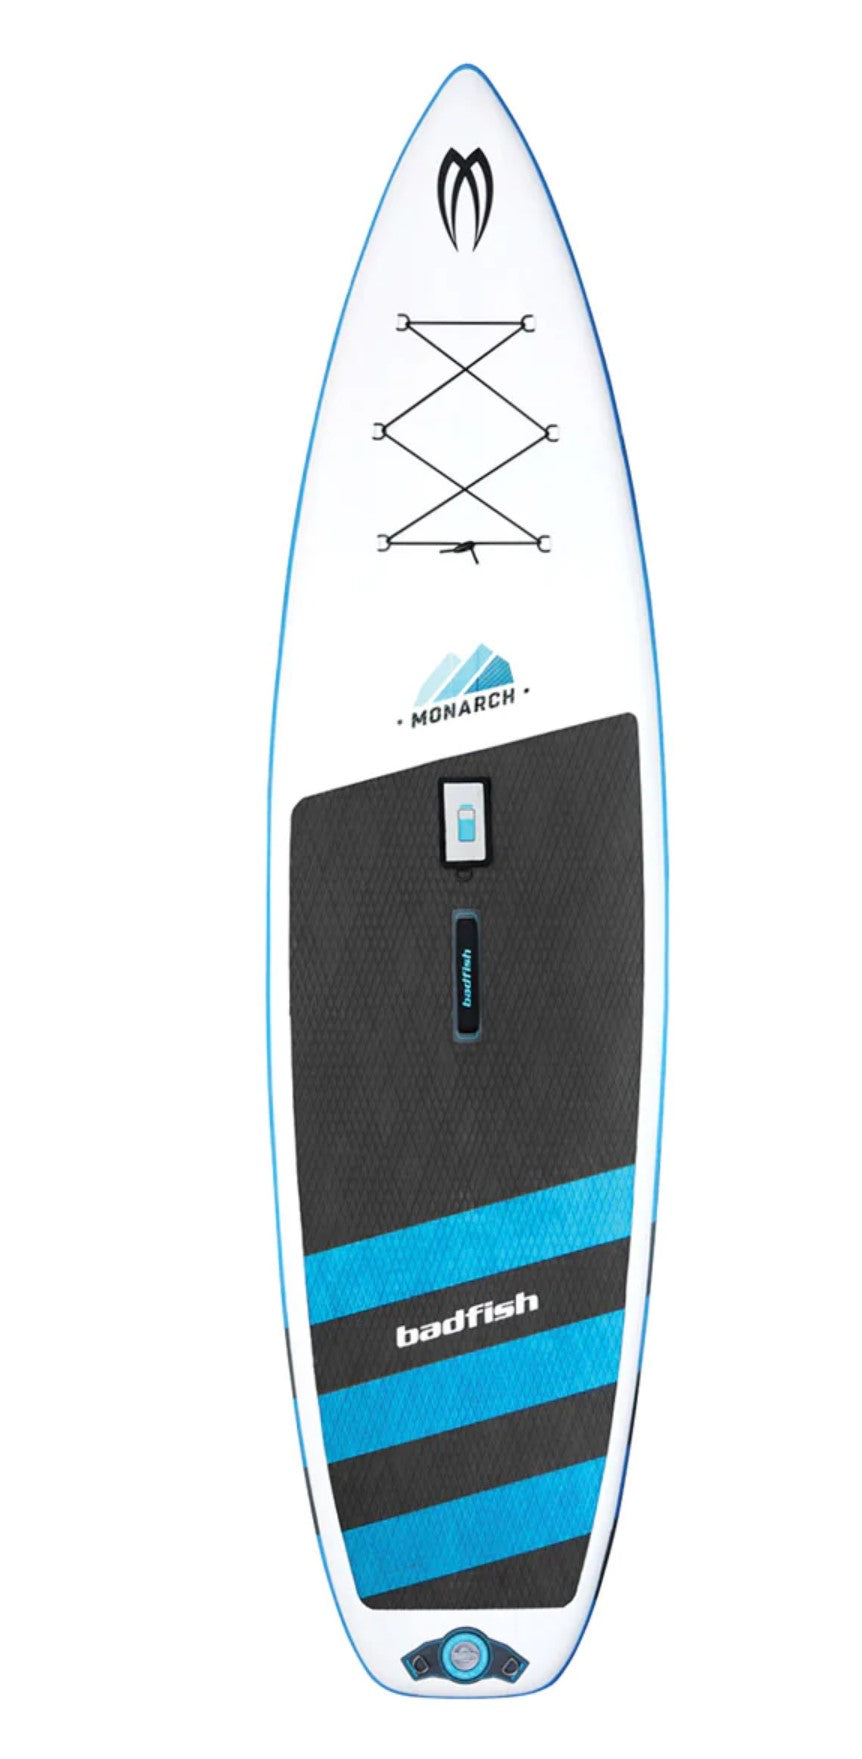 Badfish Stand-Up paddleboard sold by River Station Gear